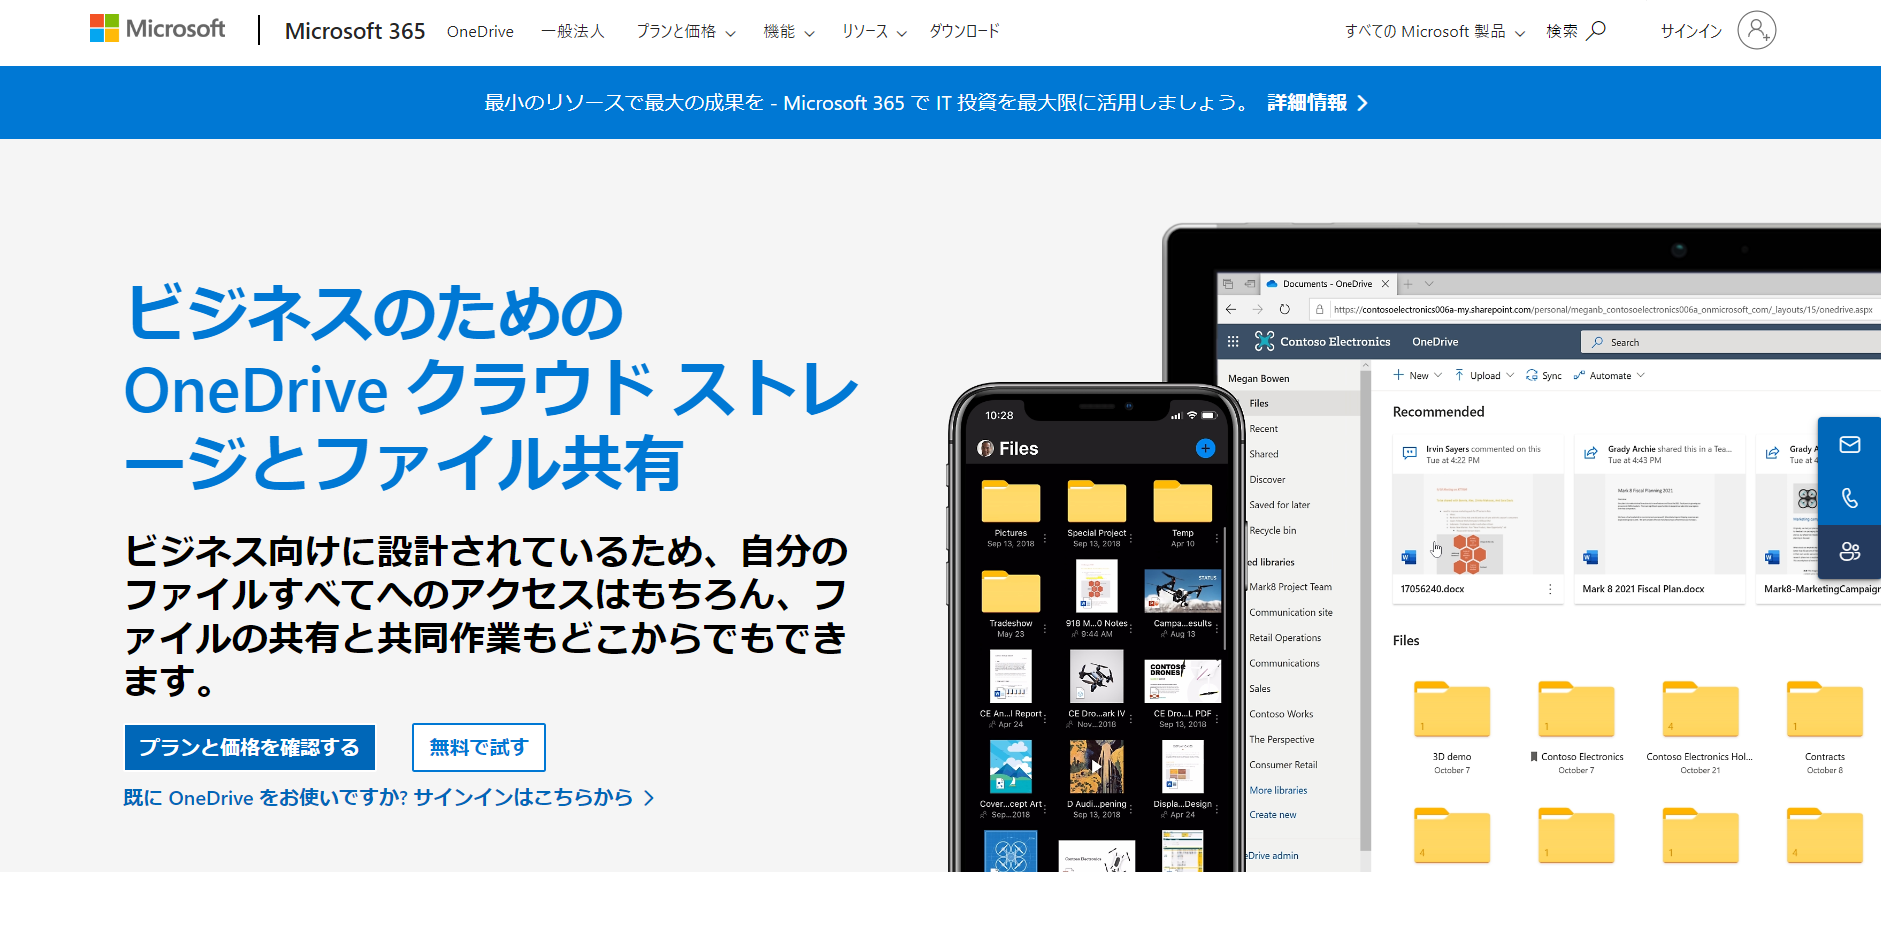 OneDrive for Businessのトップページ